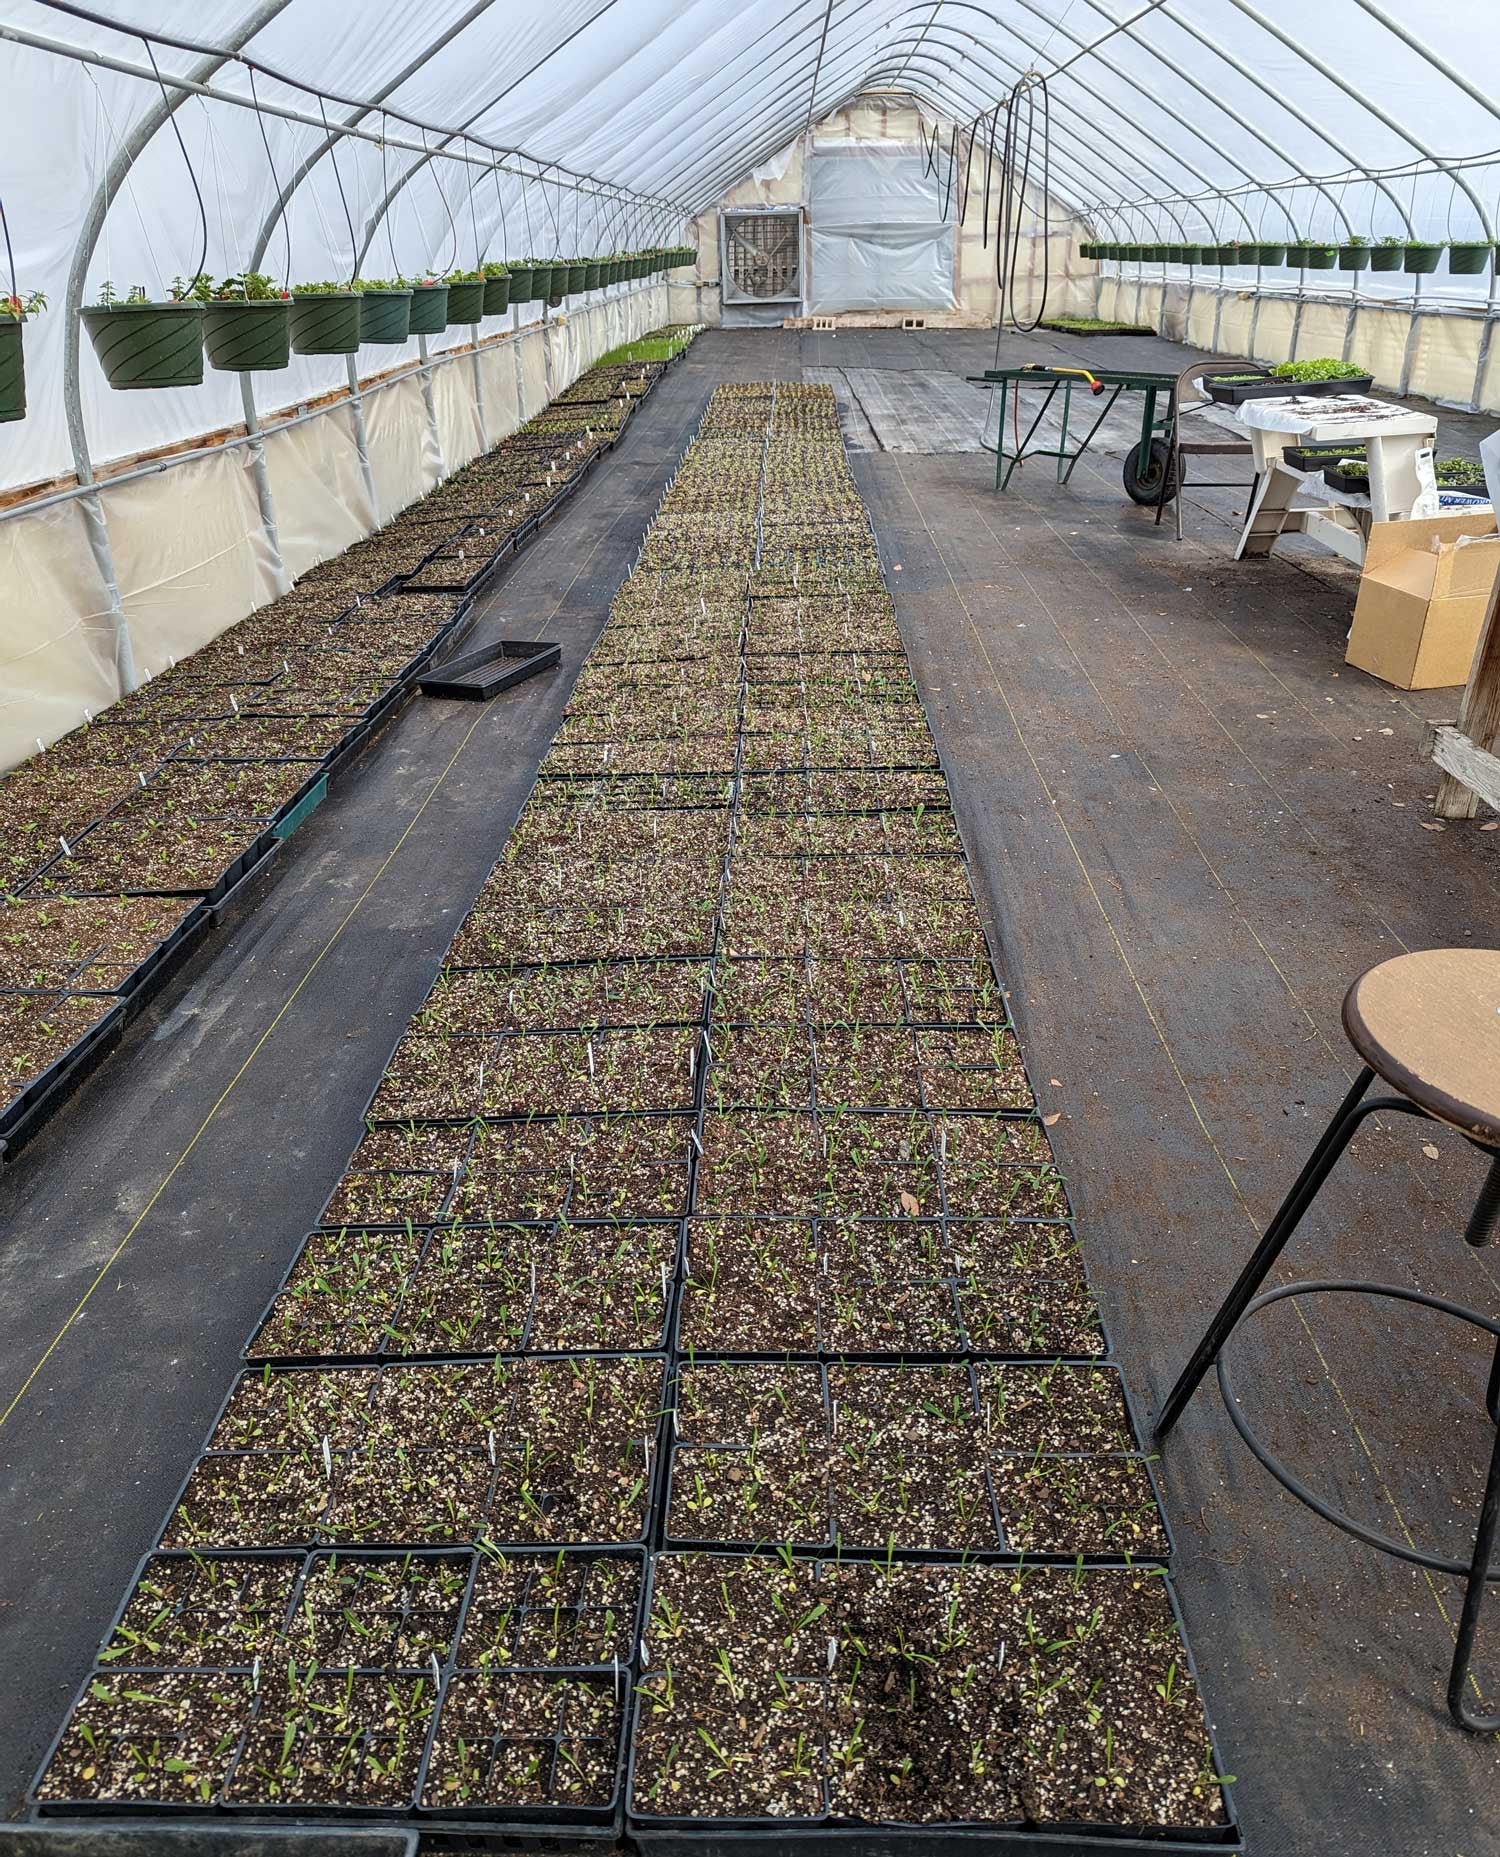 These seedlings are soft. Just look at these accommodations: 80 degree heat, high moisture and lots of TLC. 42nd Street Greenhouse in Salt Lake City, Utah. (Photo: Amanda Blum)